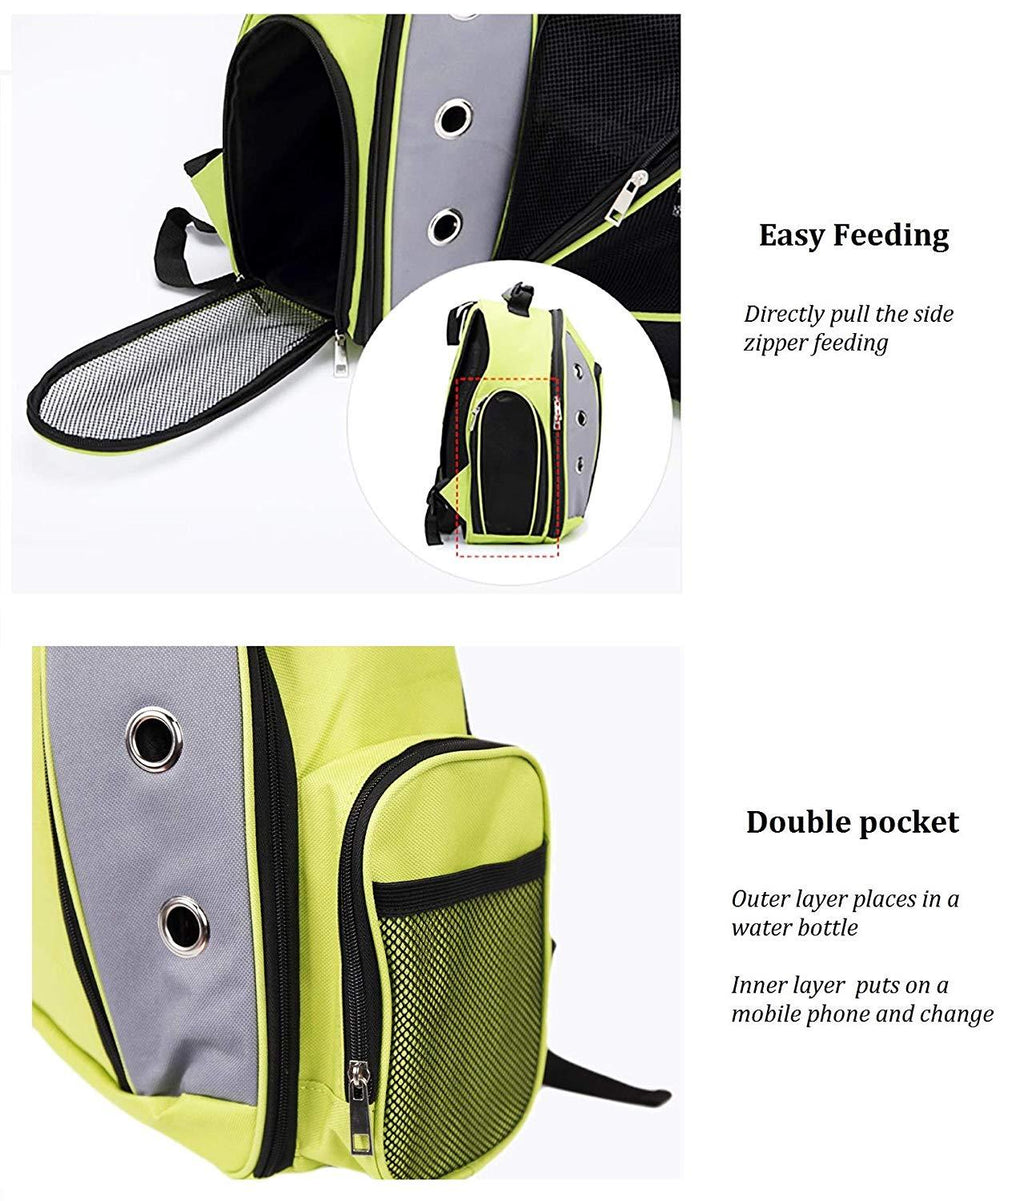 Foldable Pet Carrier Backpack with Breathable Mesh Window - Ultimate P